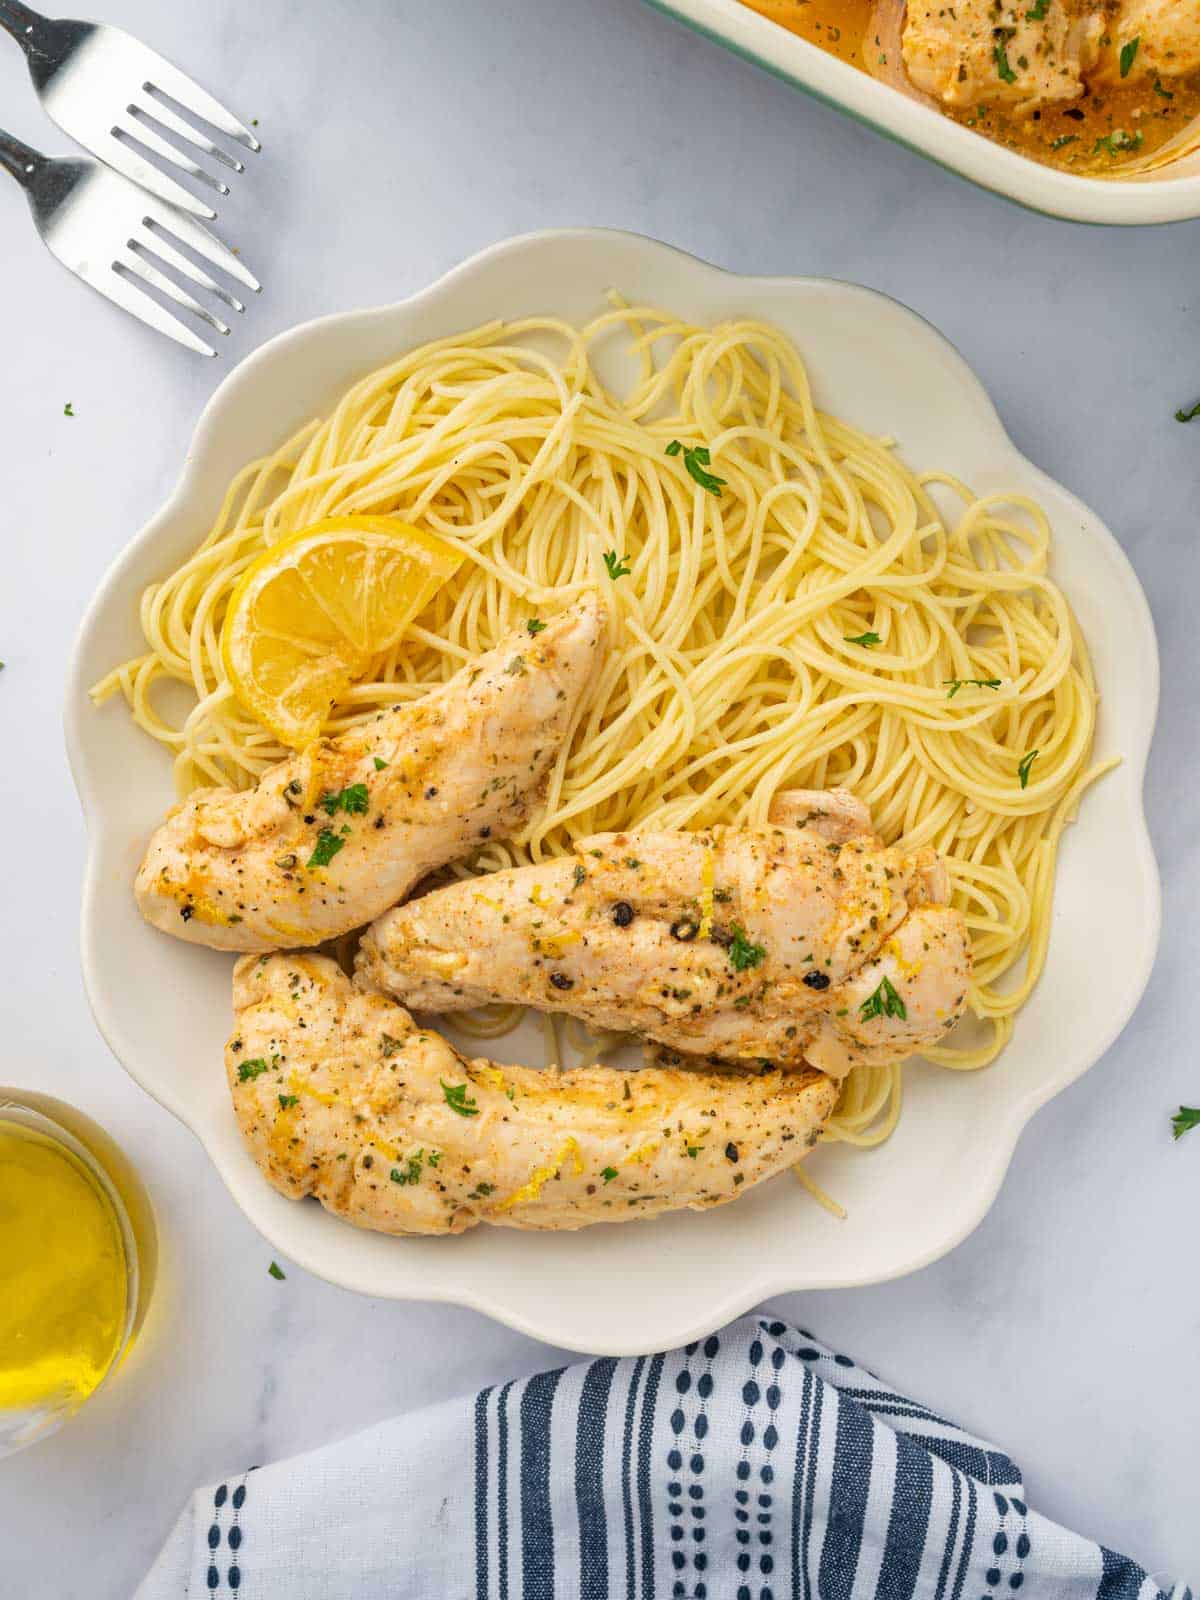 Lemon pepper chicken with pasta on a plate.